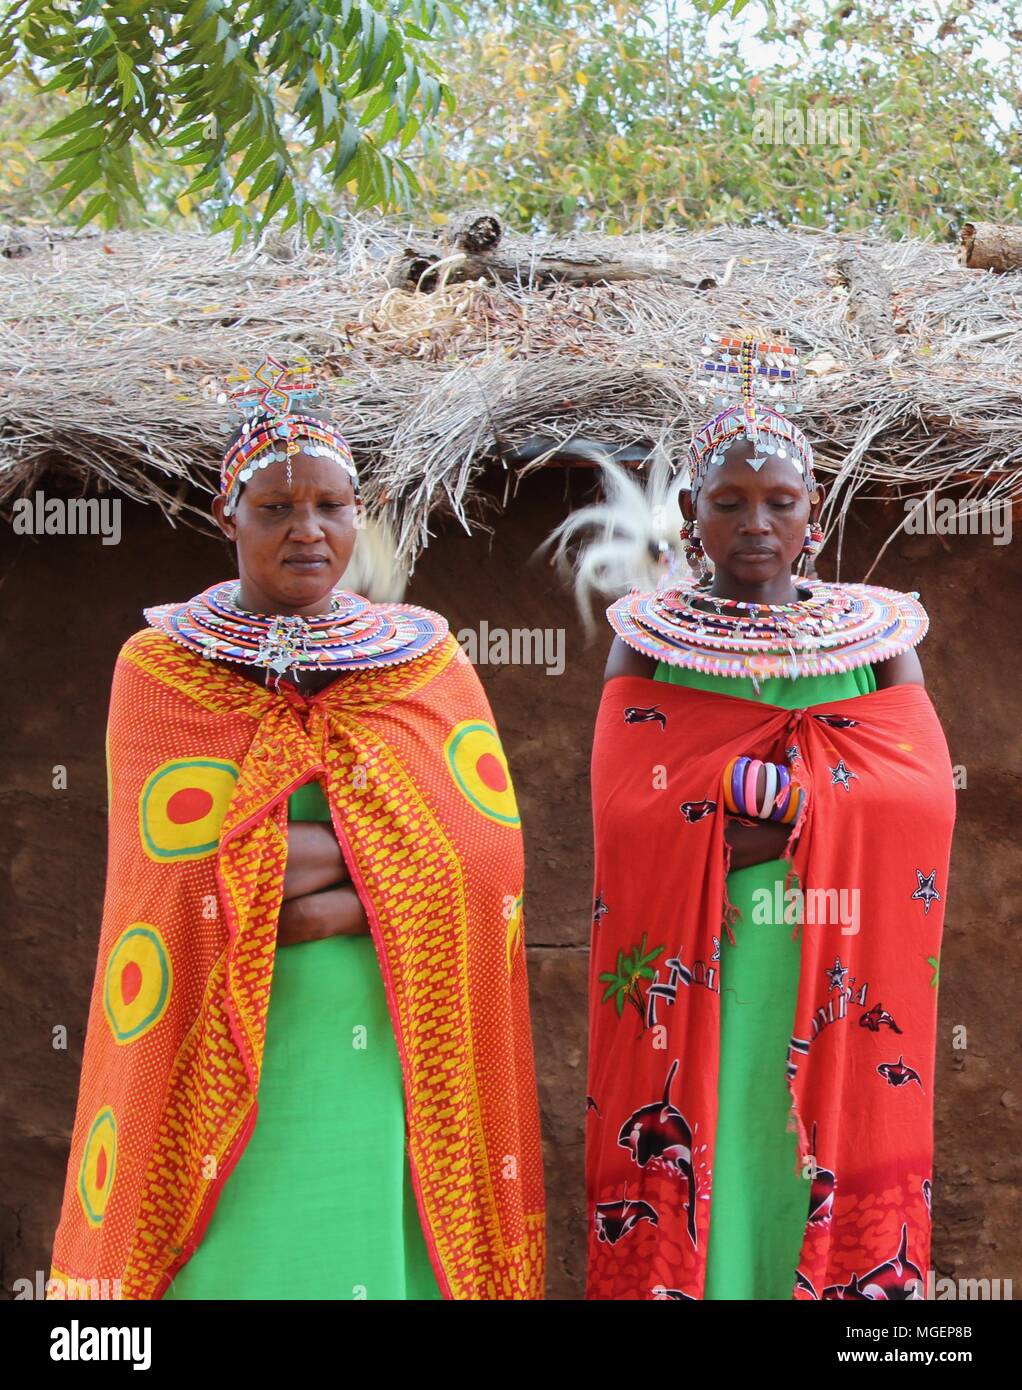 Masai women wearing colorful green and red dresses during a tribal rite in an African village in Kenya, near Nairobi Stock Photo